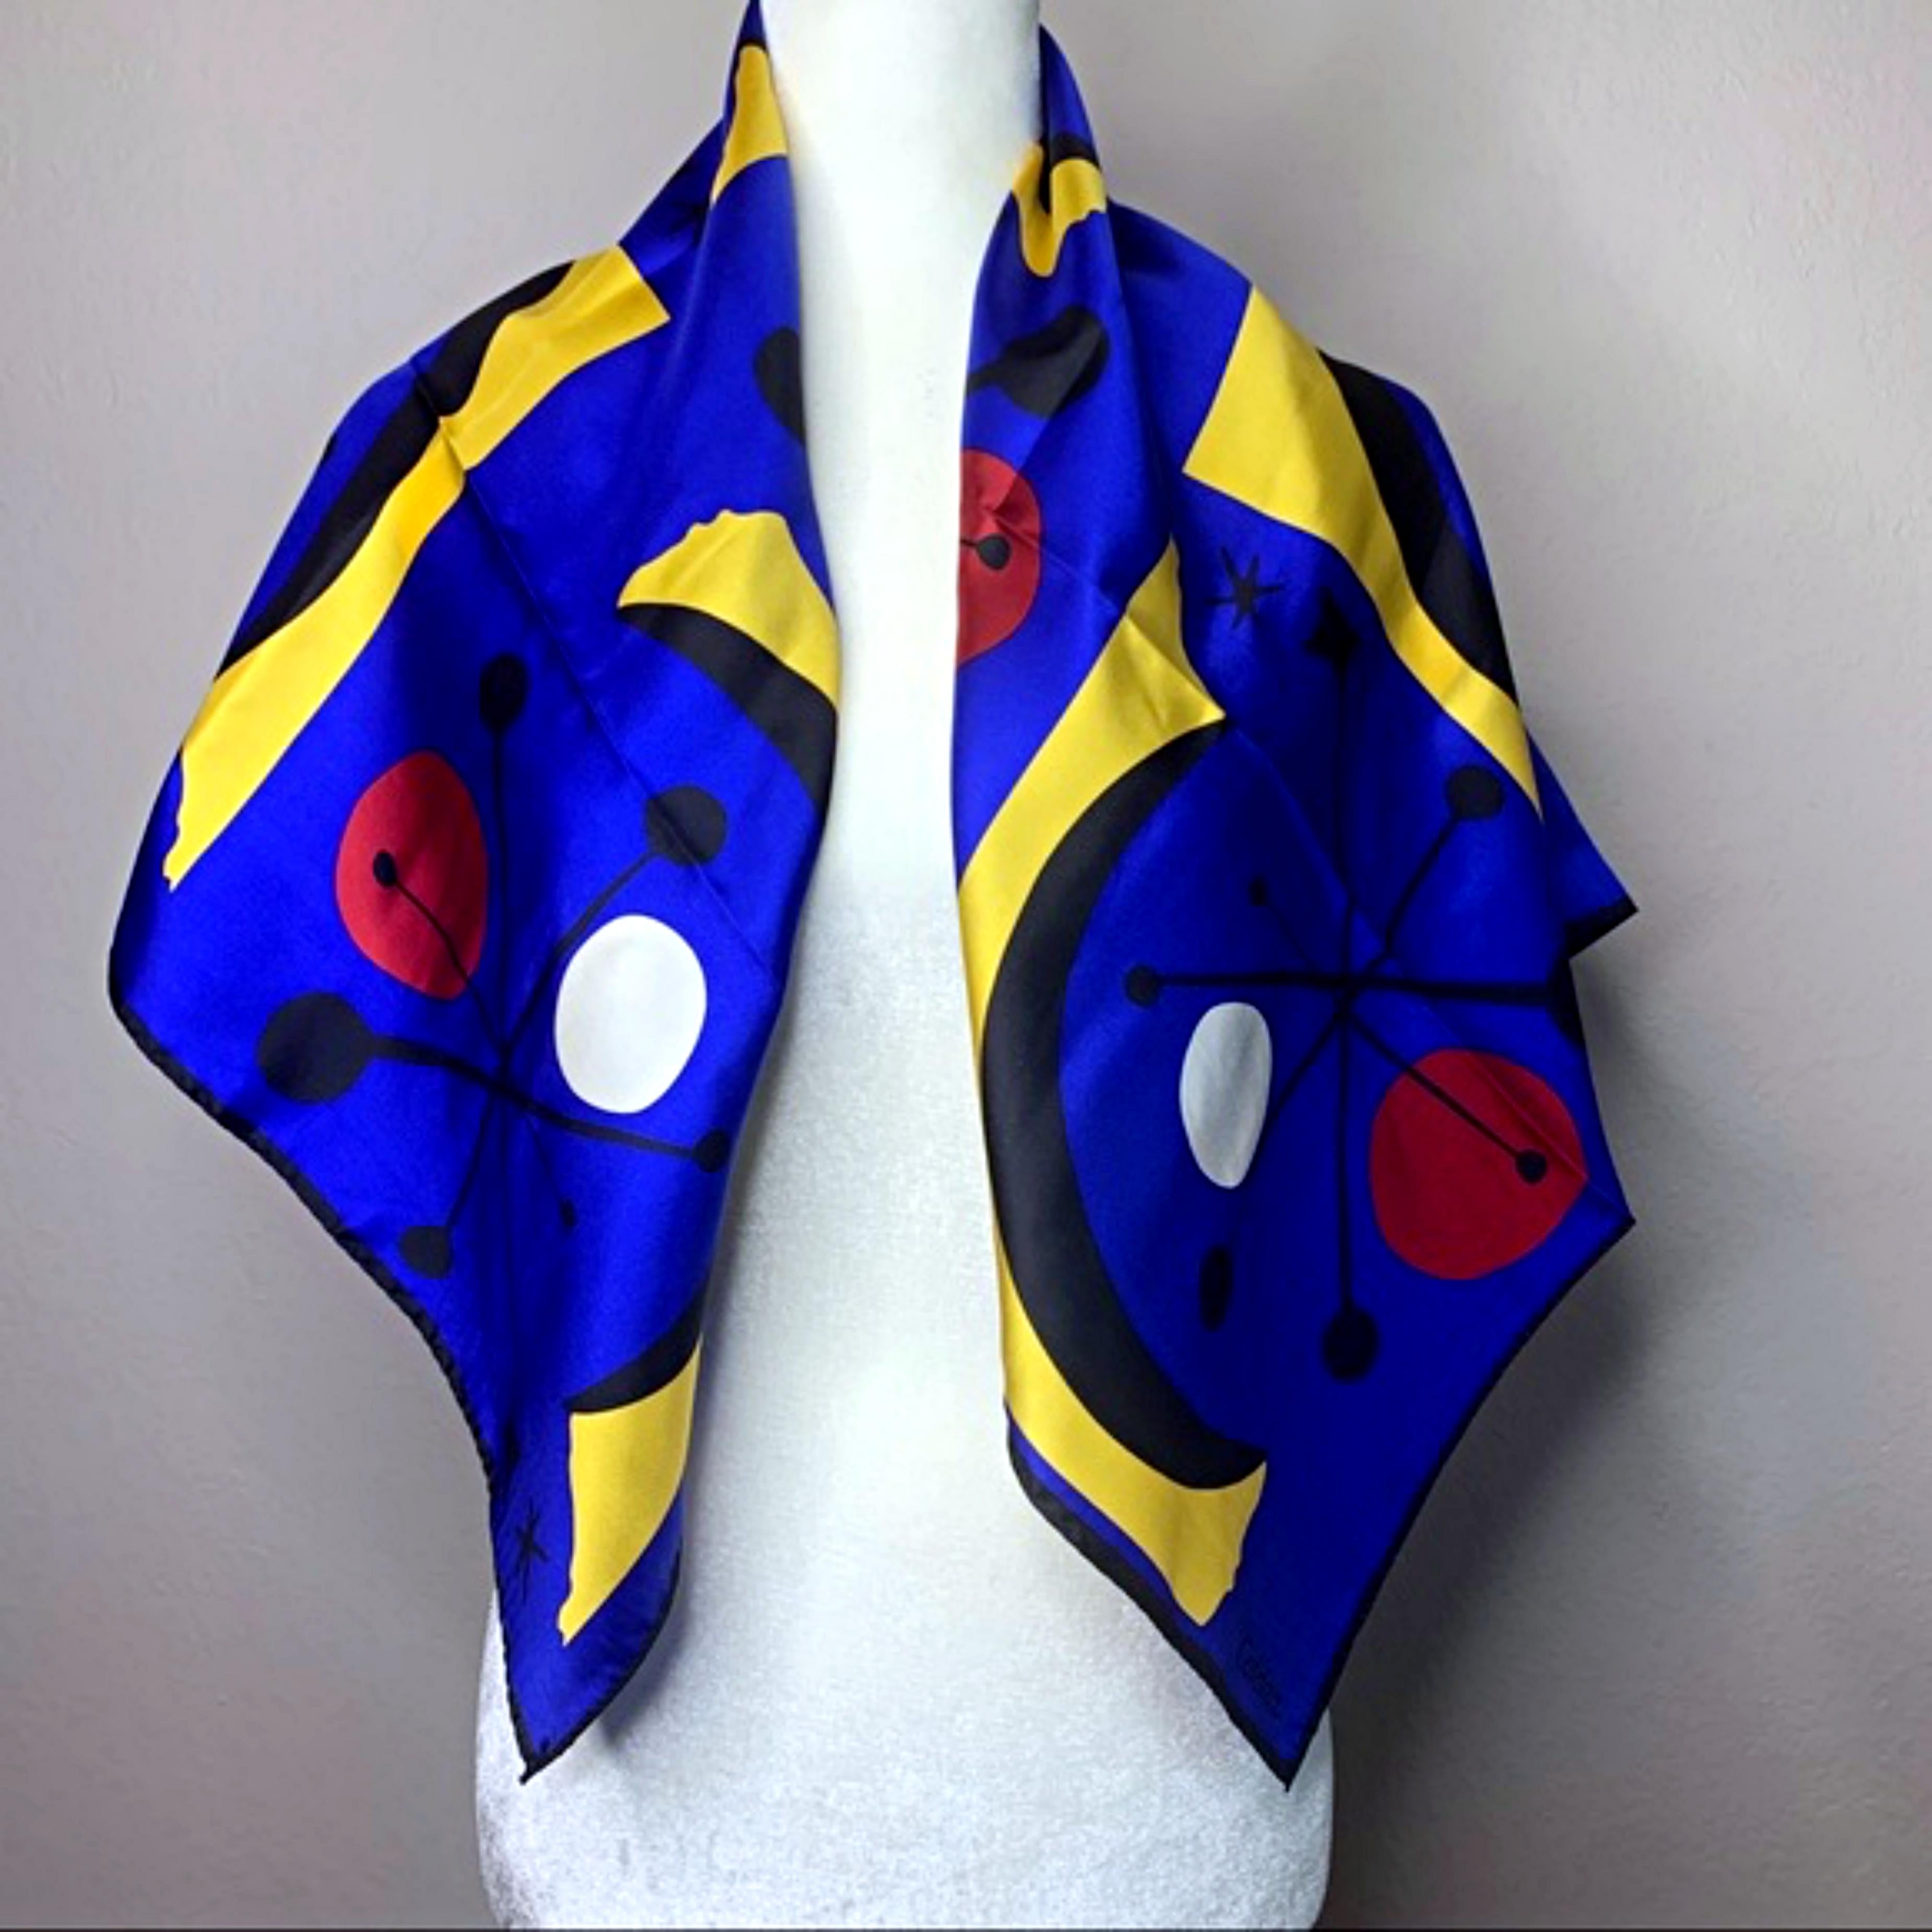 Paper Ball Silks Scarf - artist designed textile - 33 inches x 35 inches - Print by Alexander Calder